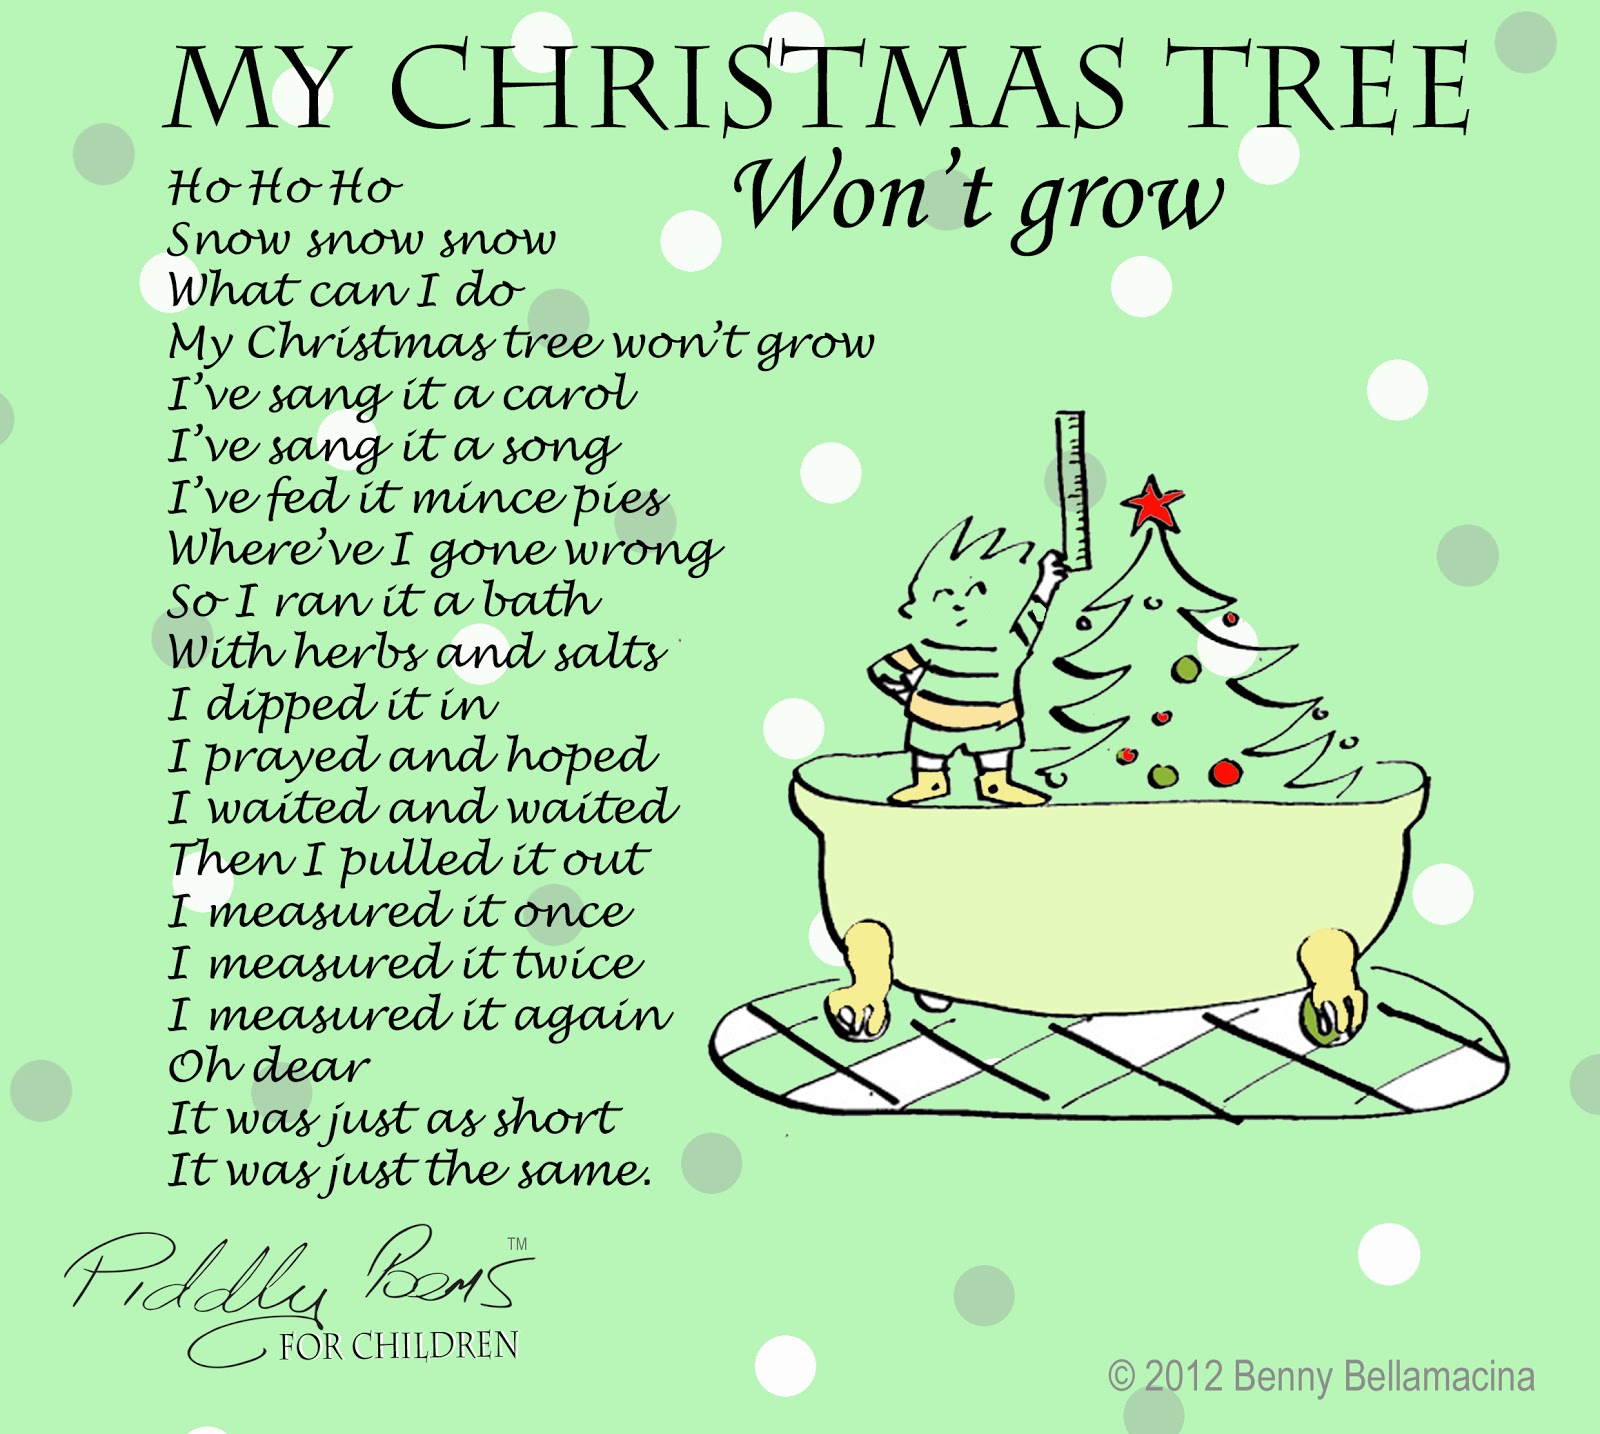 Piddly poems: My Christmas tree won't grow